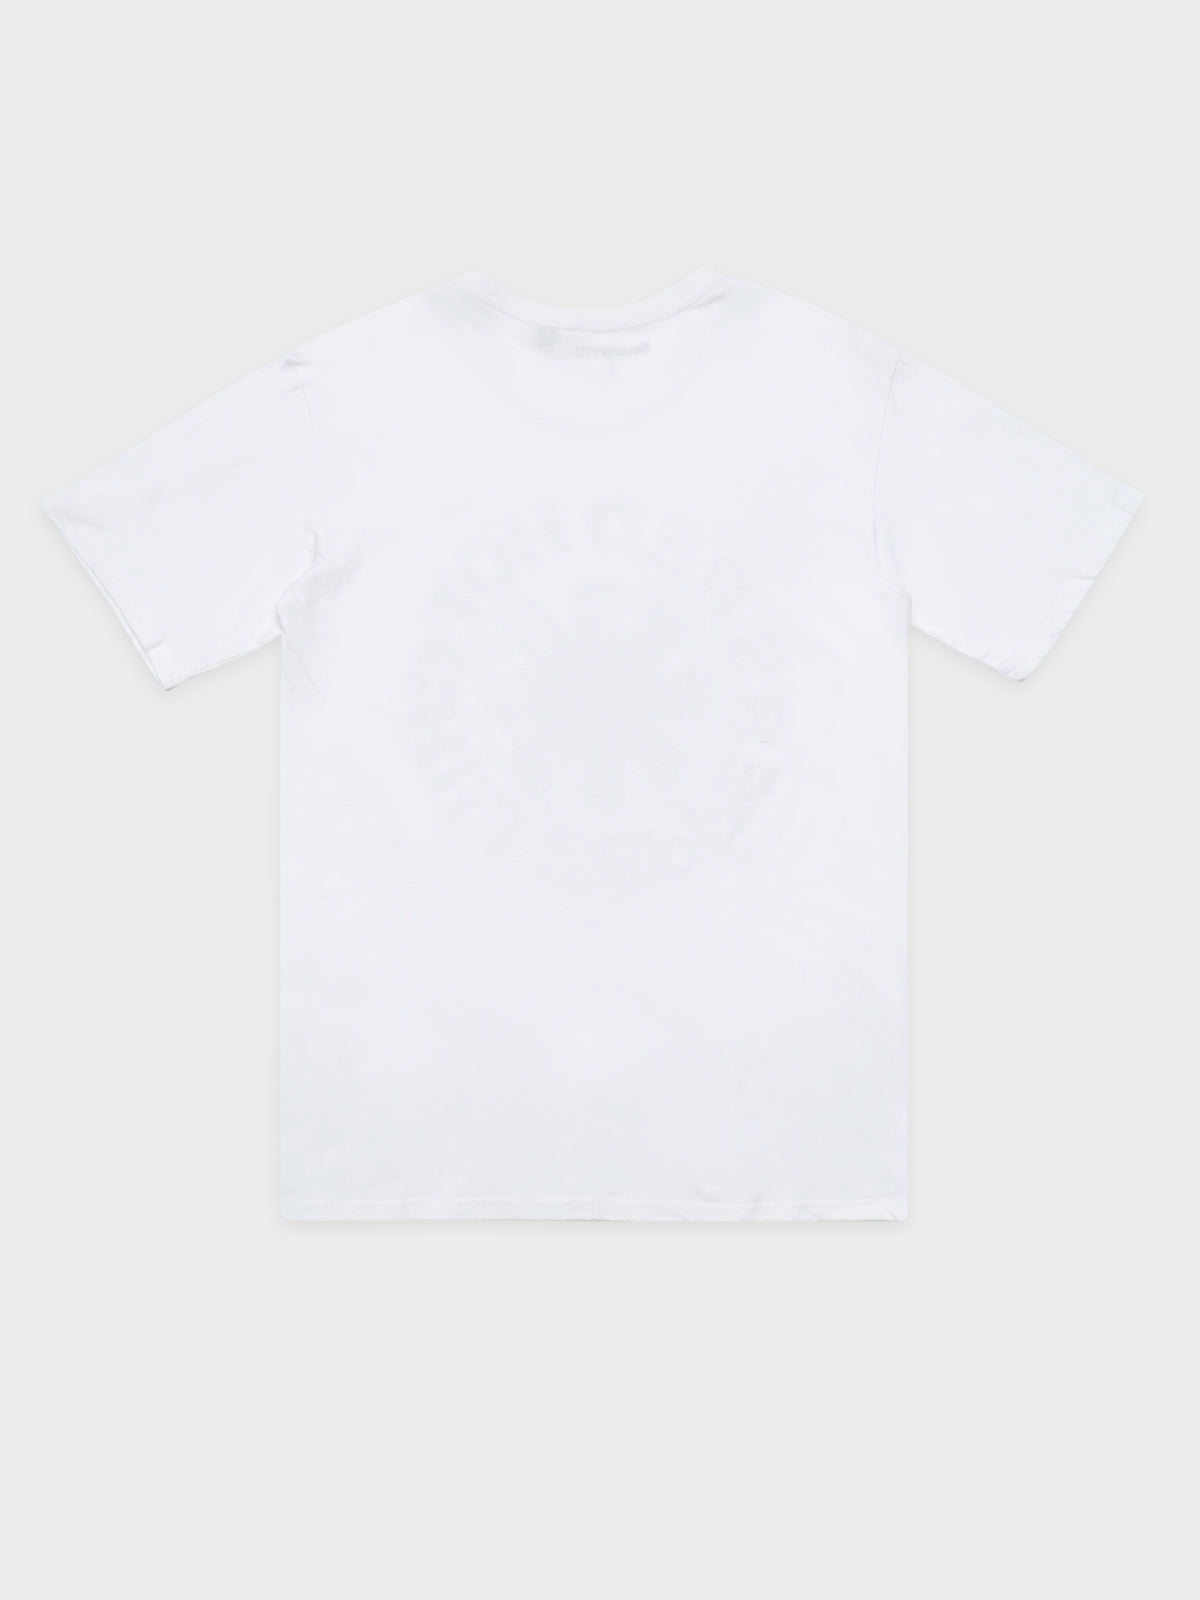 Red Hot Chilli Peppers Band T-Shirt in White